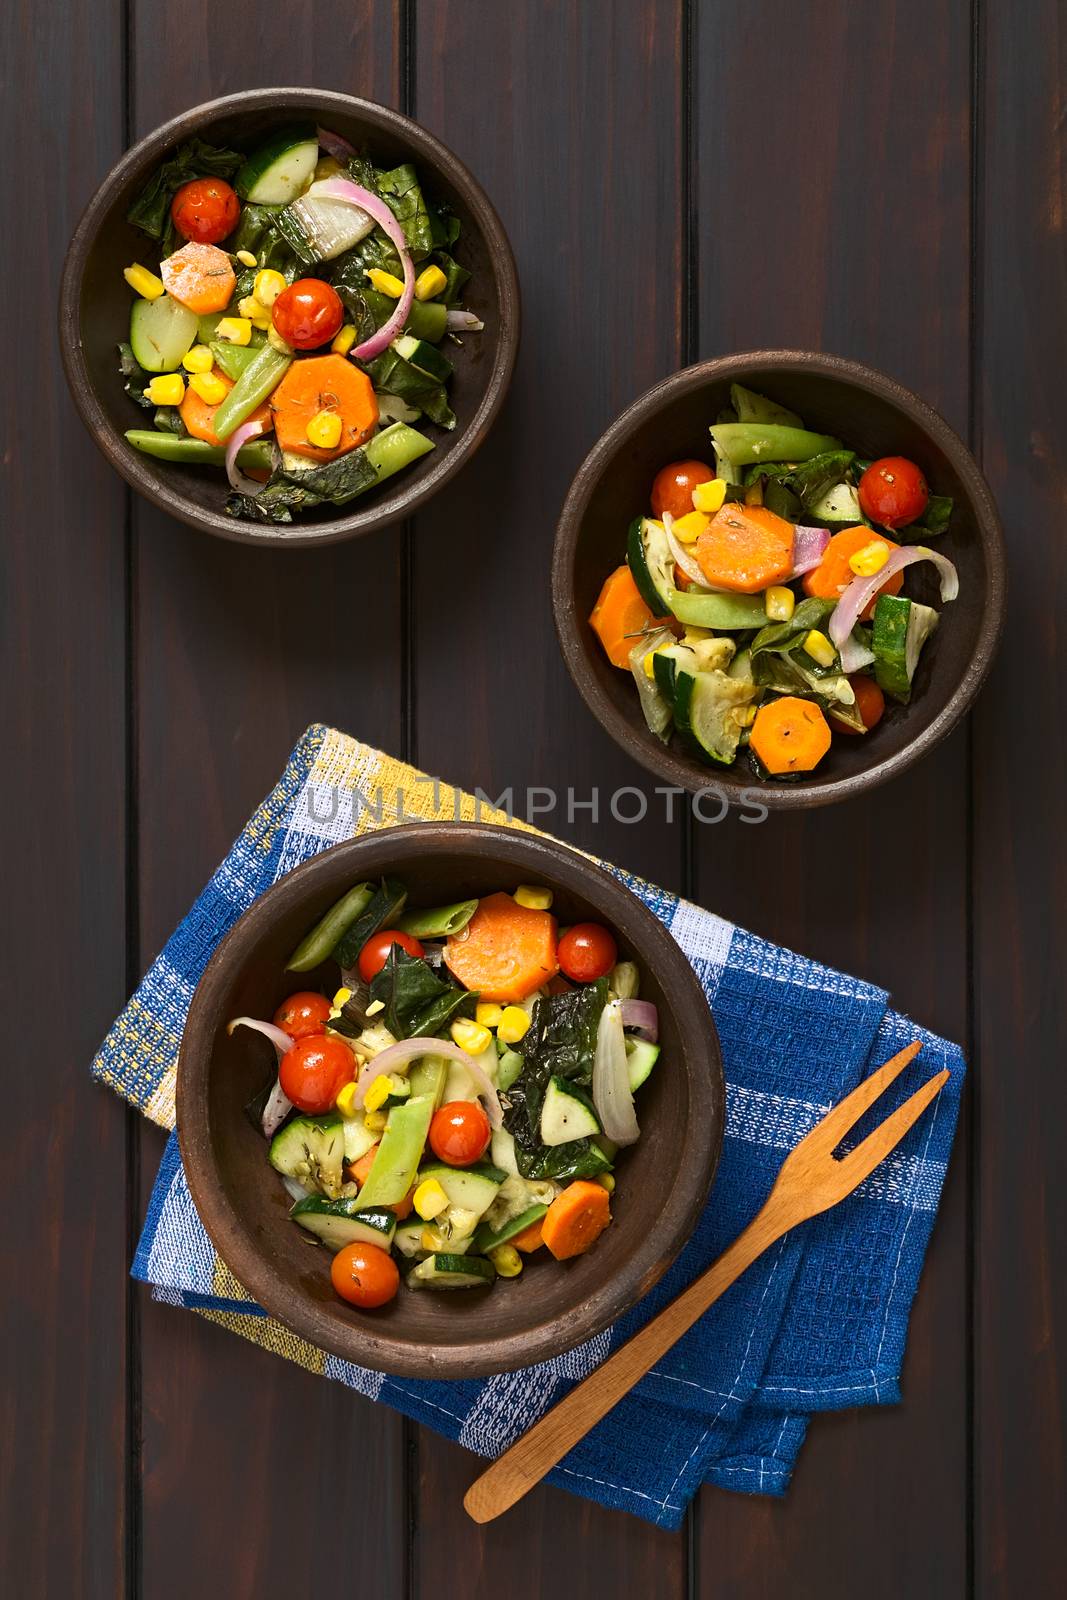 Baked Vegetables by ildi